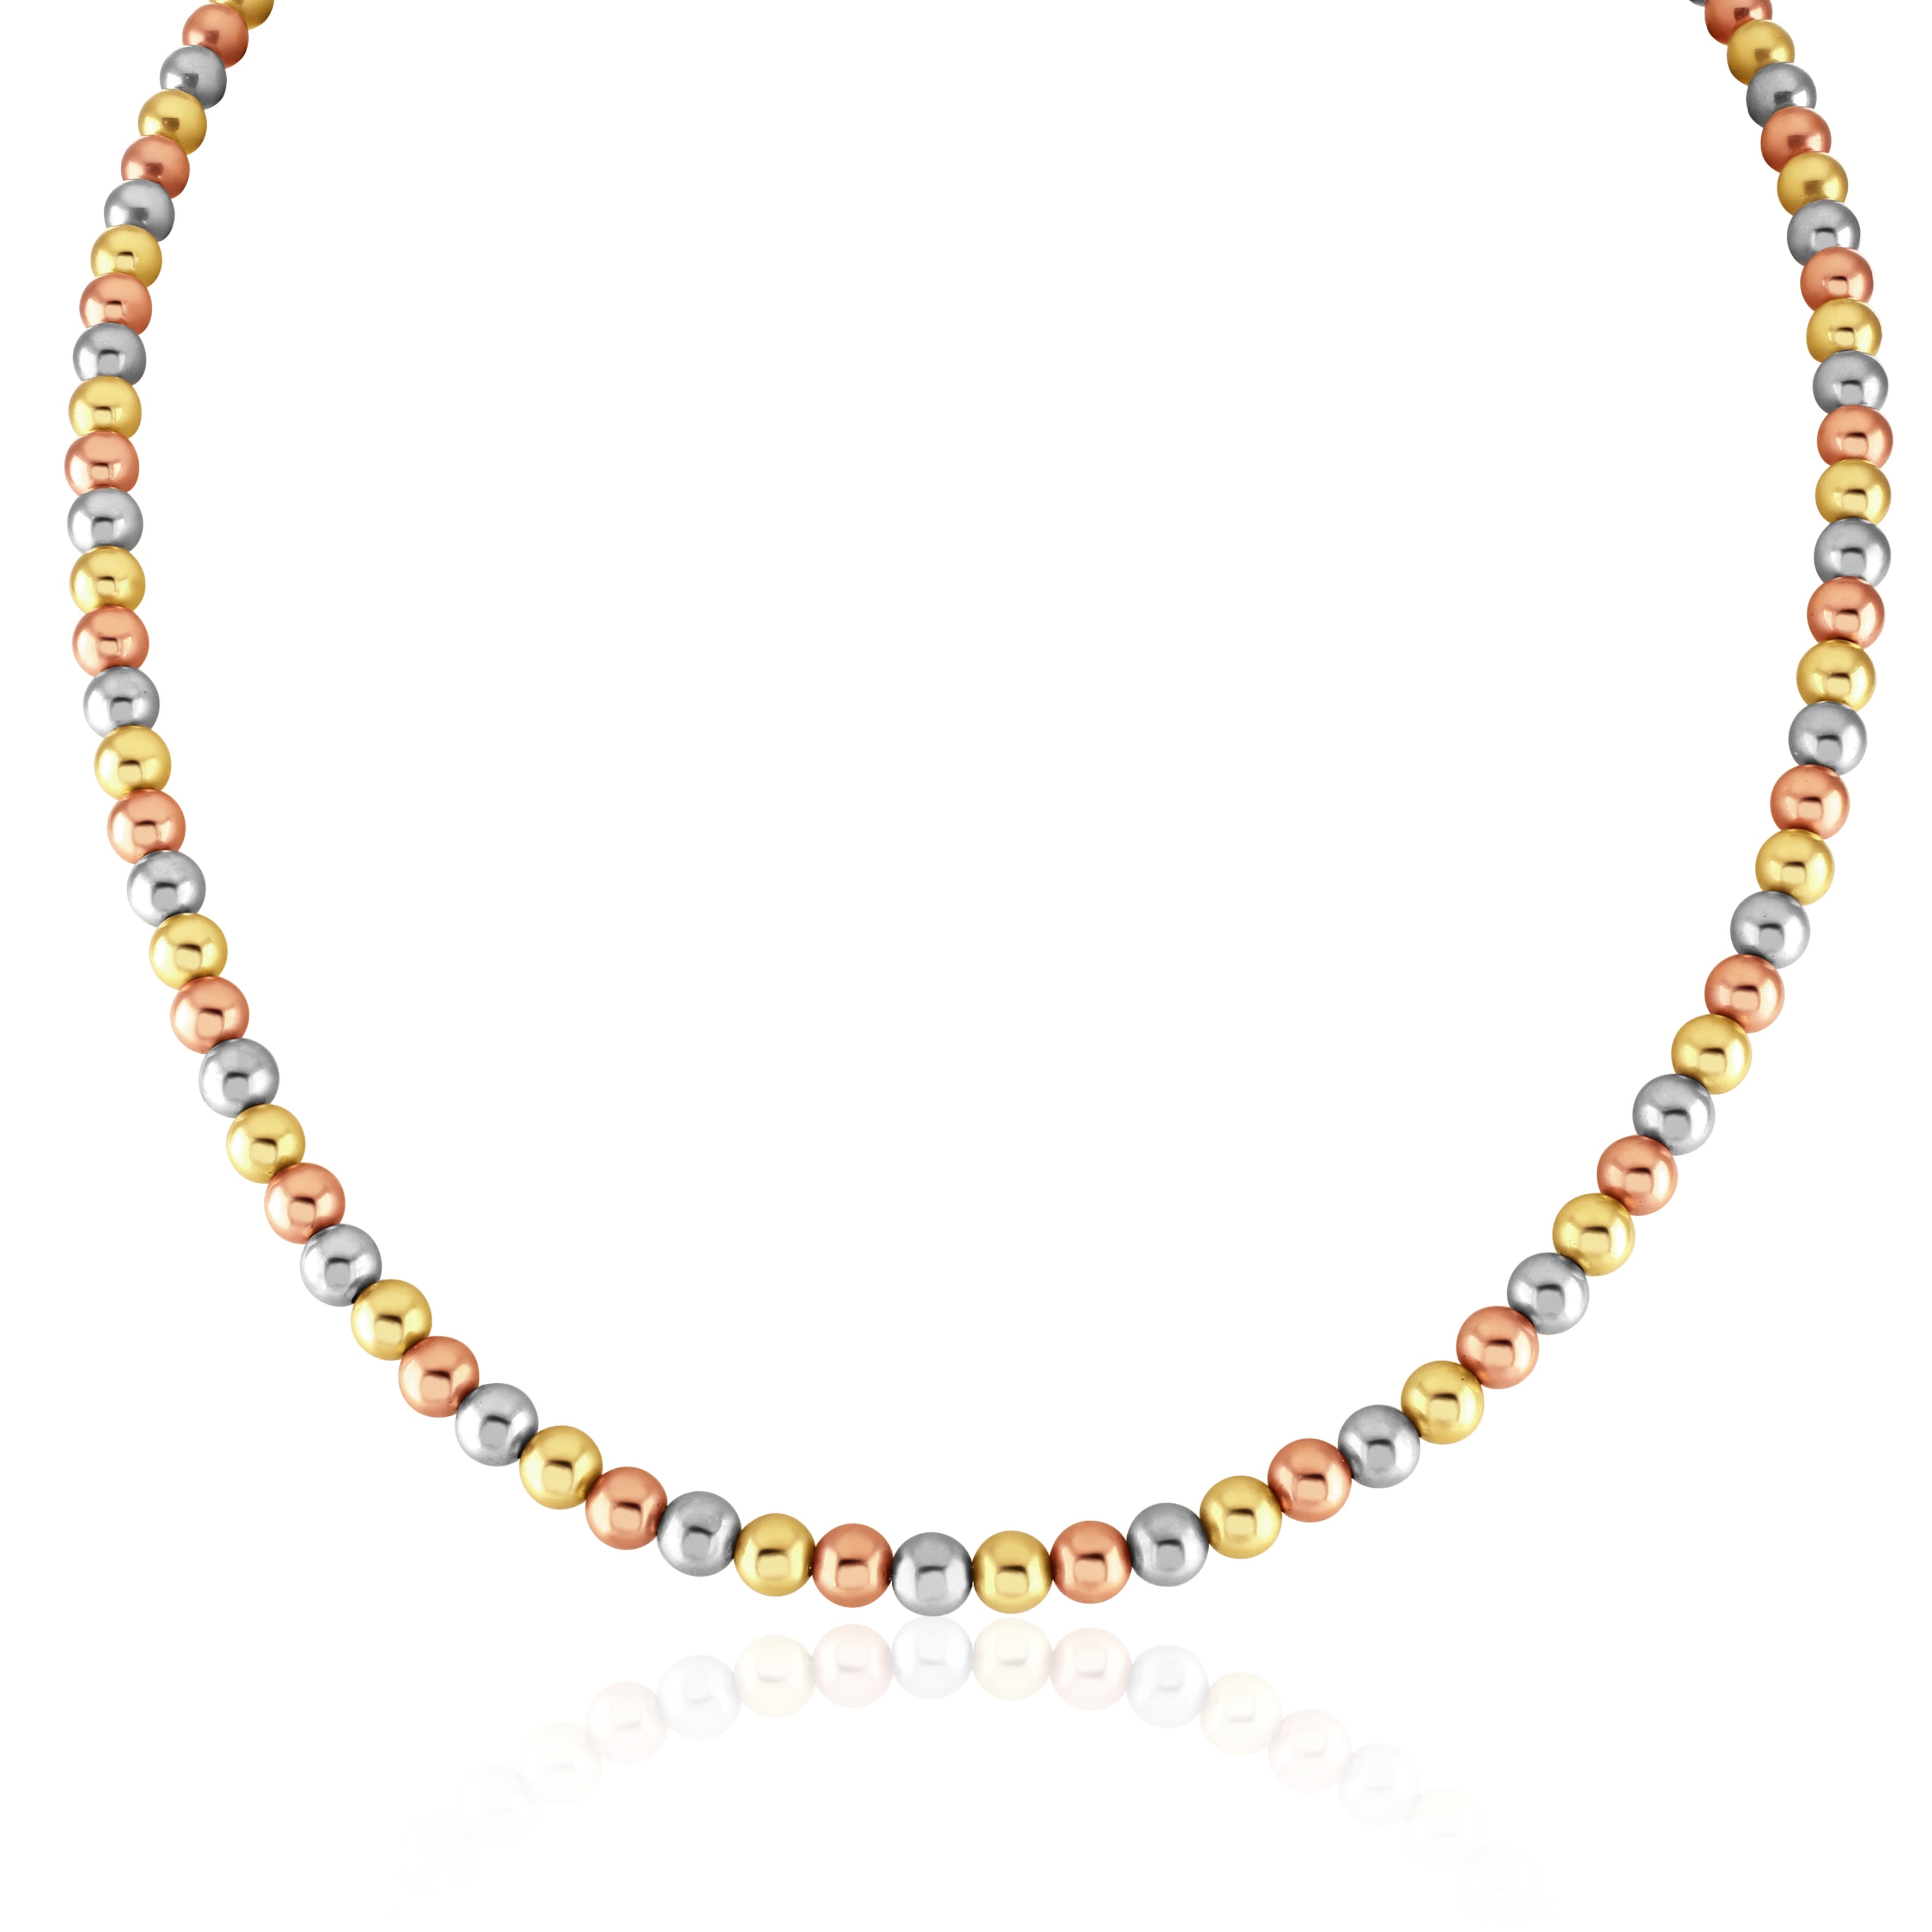 18ct gold Multi-colored bead necklace